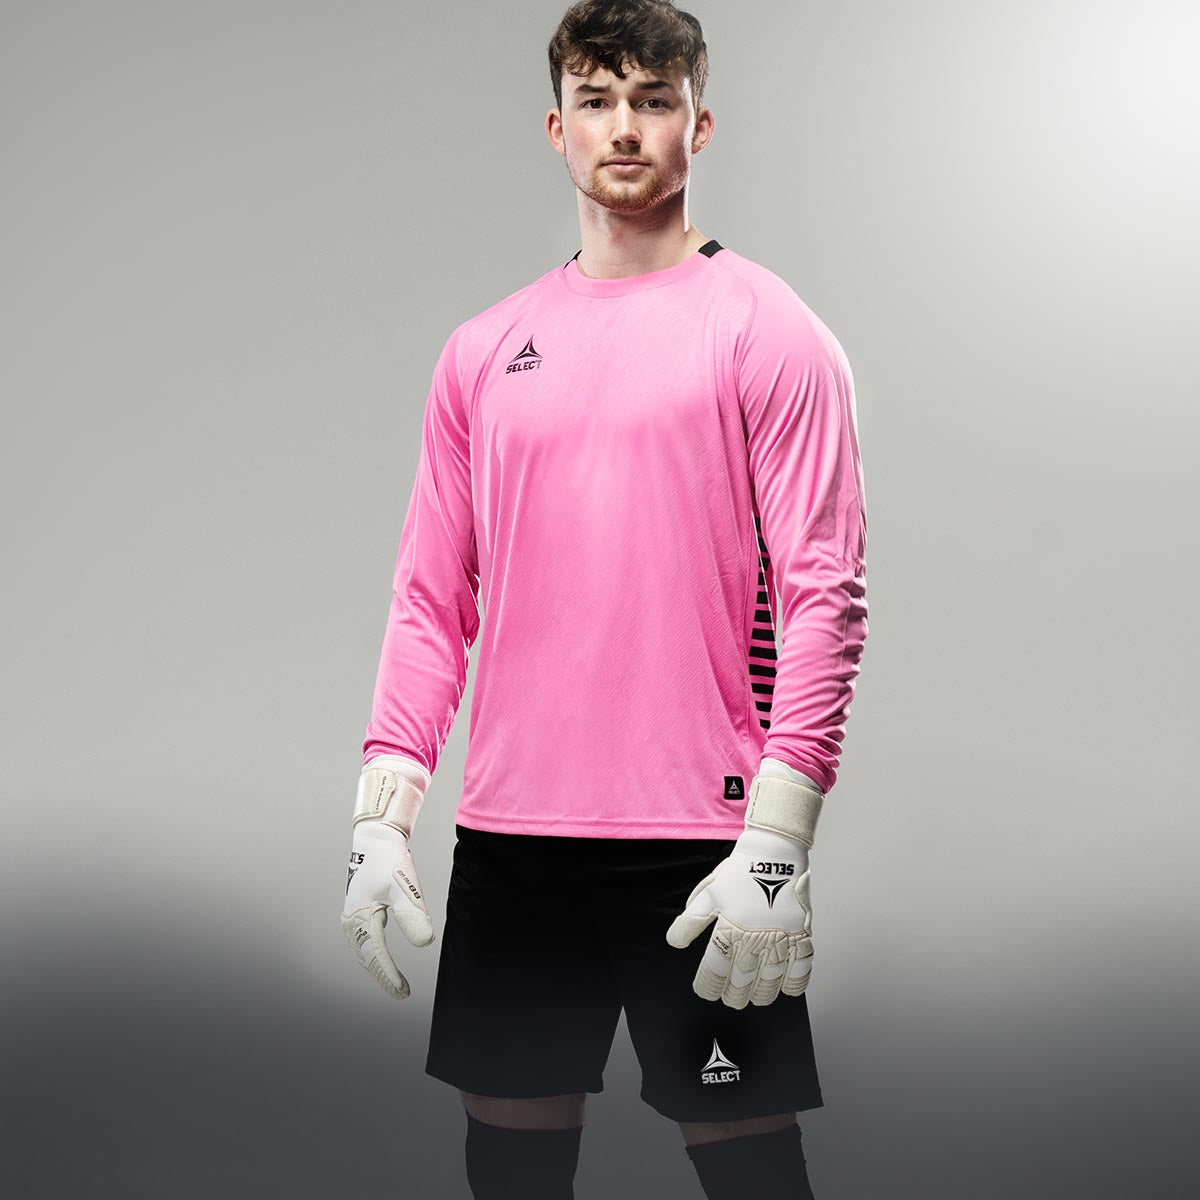 Just Keepers, Goalkeeper Baselayer, Thermal football base layer